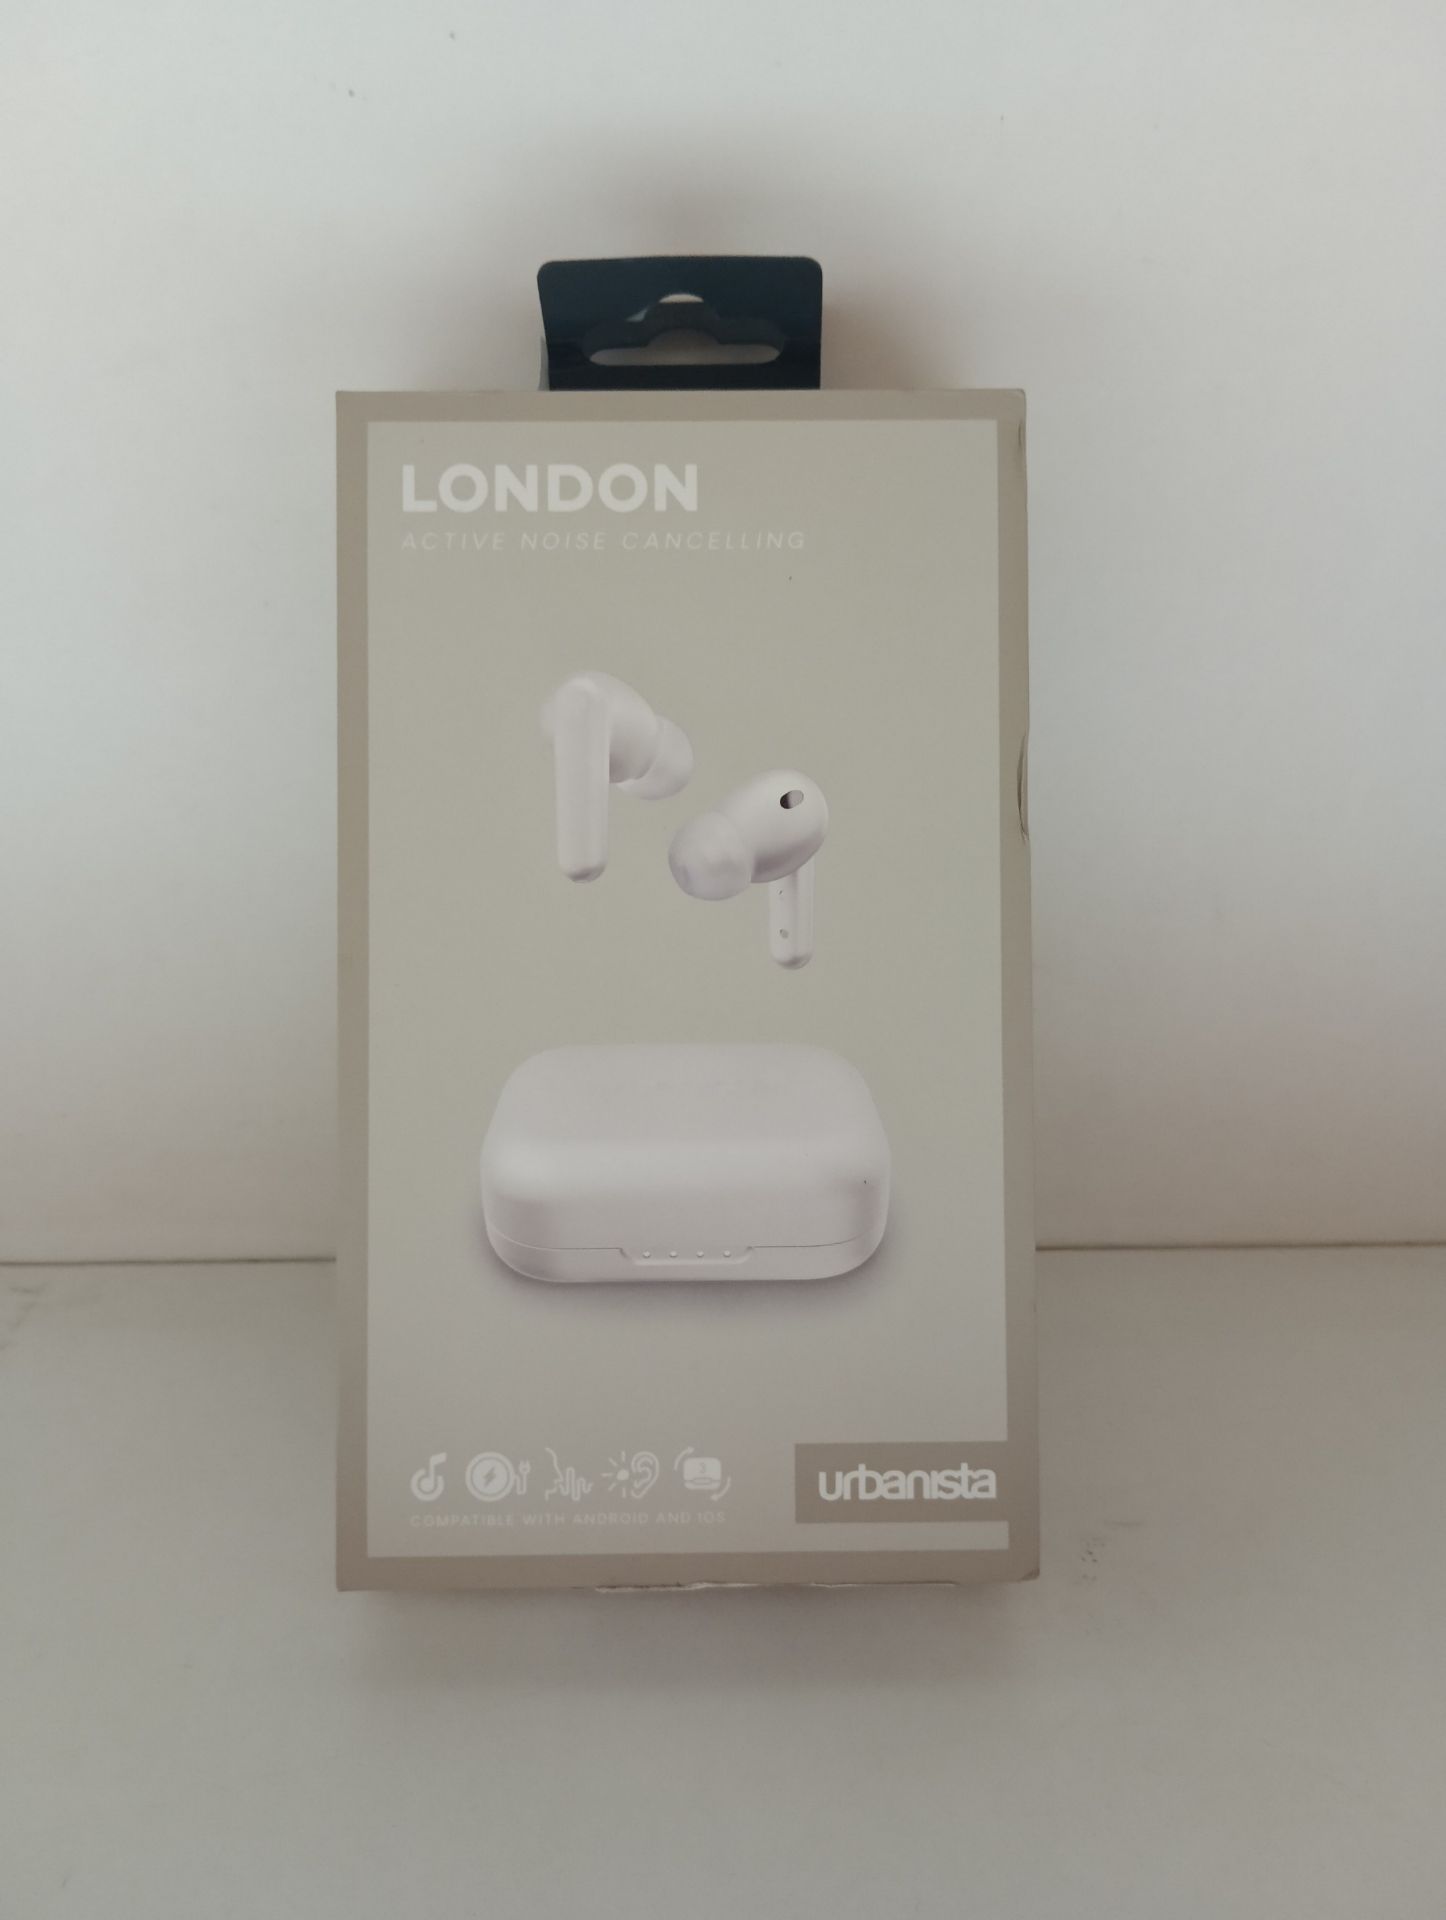 RRP £33.49 Urbanista London True Wireless Earbuds Headphones with Active Noise Cancelling - Image 2 of 2